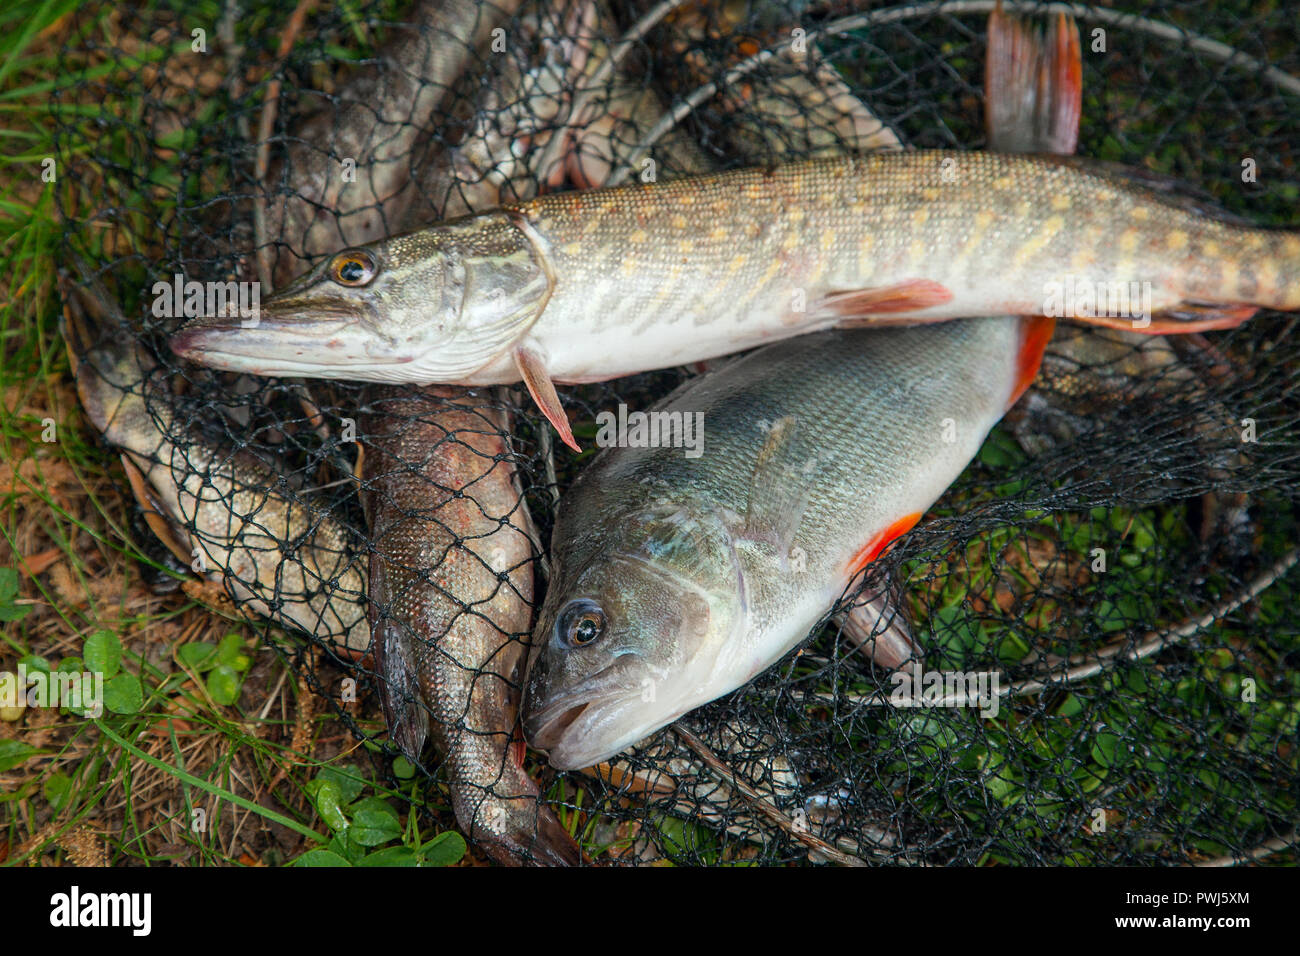 Freshwater perch and Northern pike fish know as Esox Lucius on